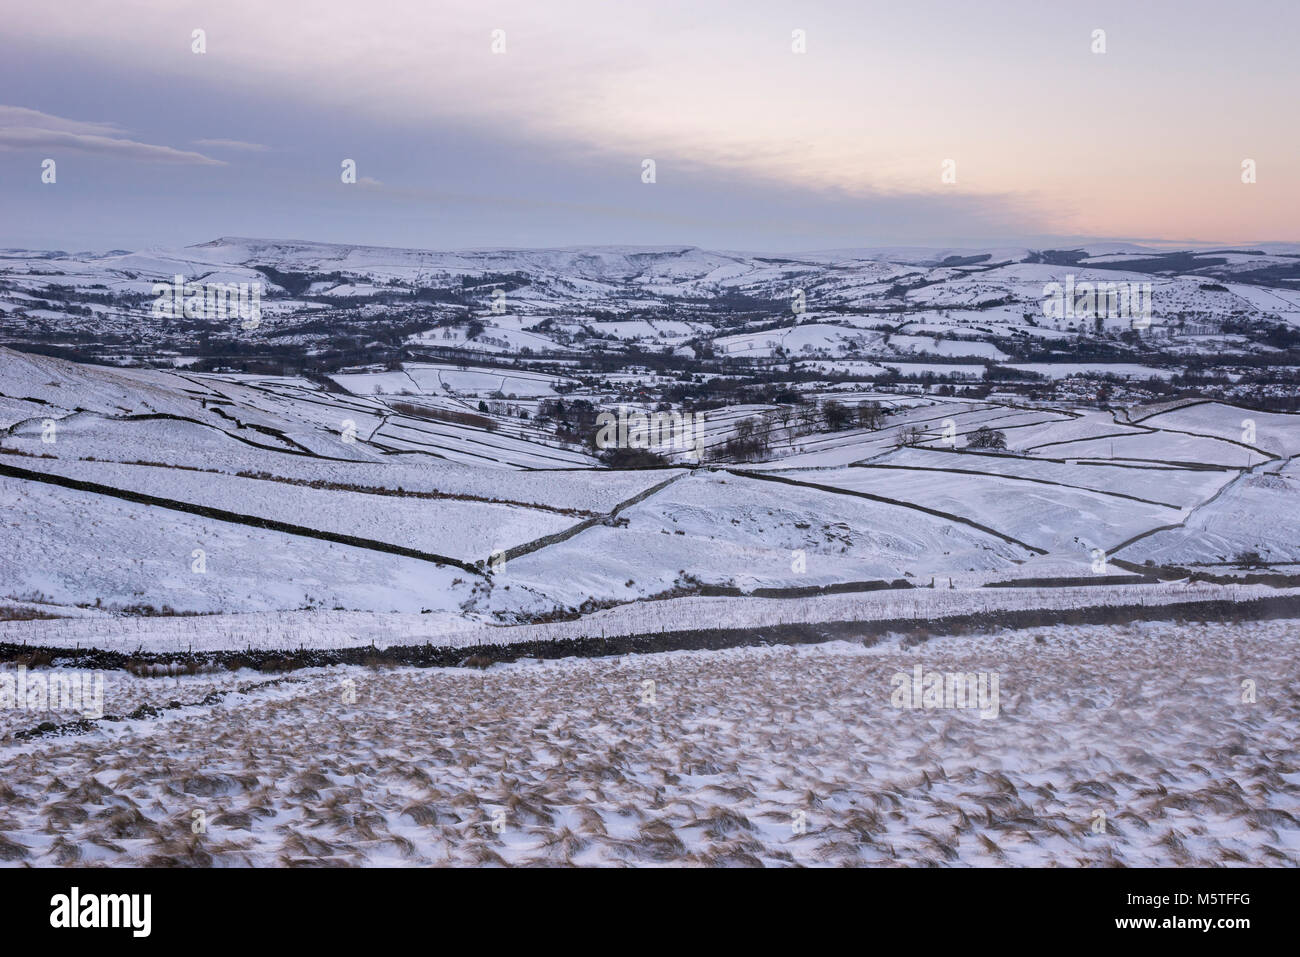 Snowy winter morning in the hills of the Peak District. View towards Chapel-en-le-frith in Derbyshire, England. Stock Photo